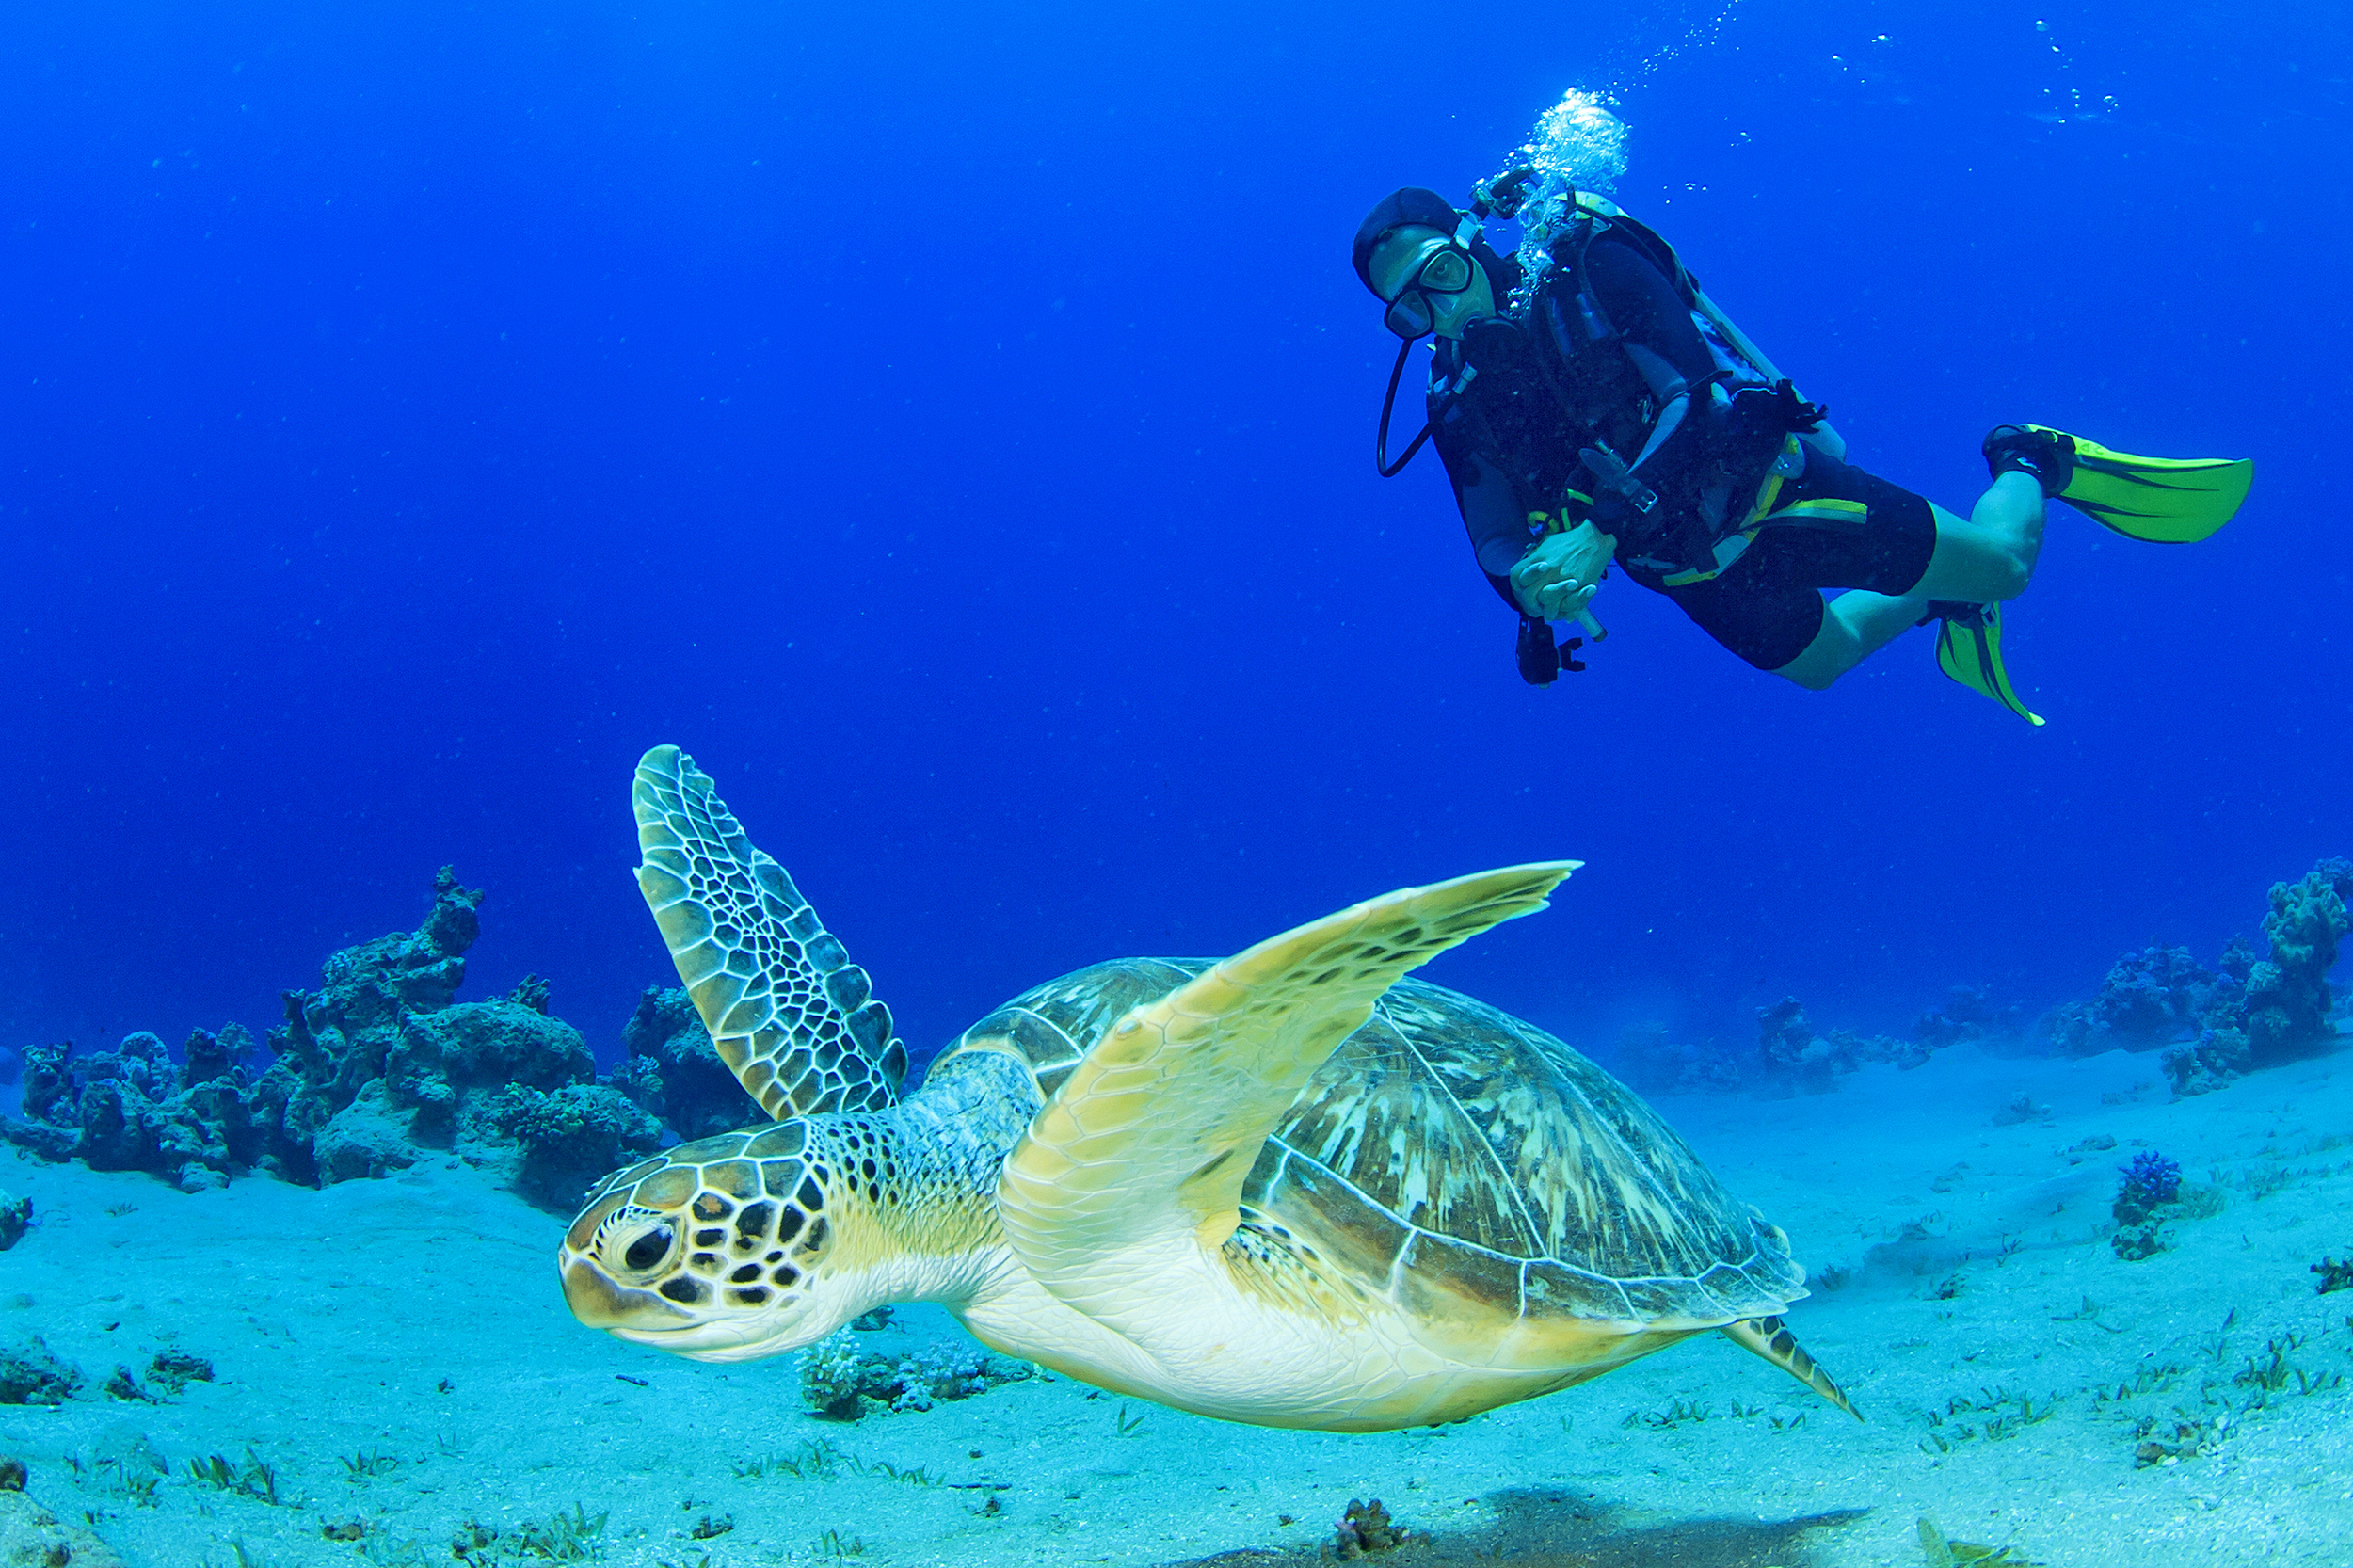 A diver swims next to a turtle